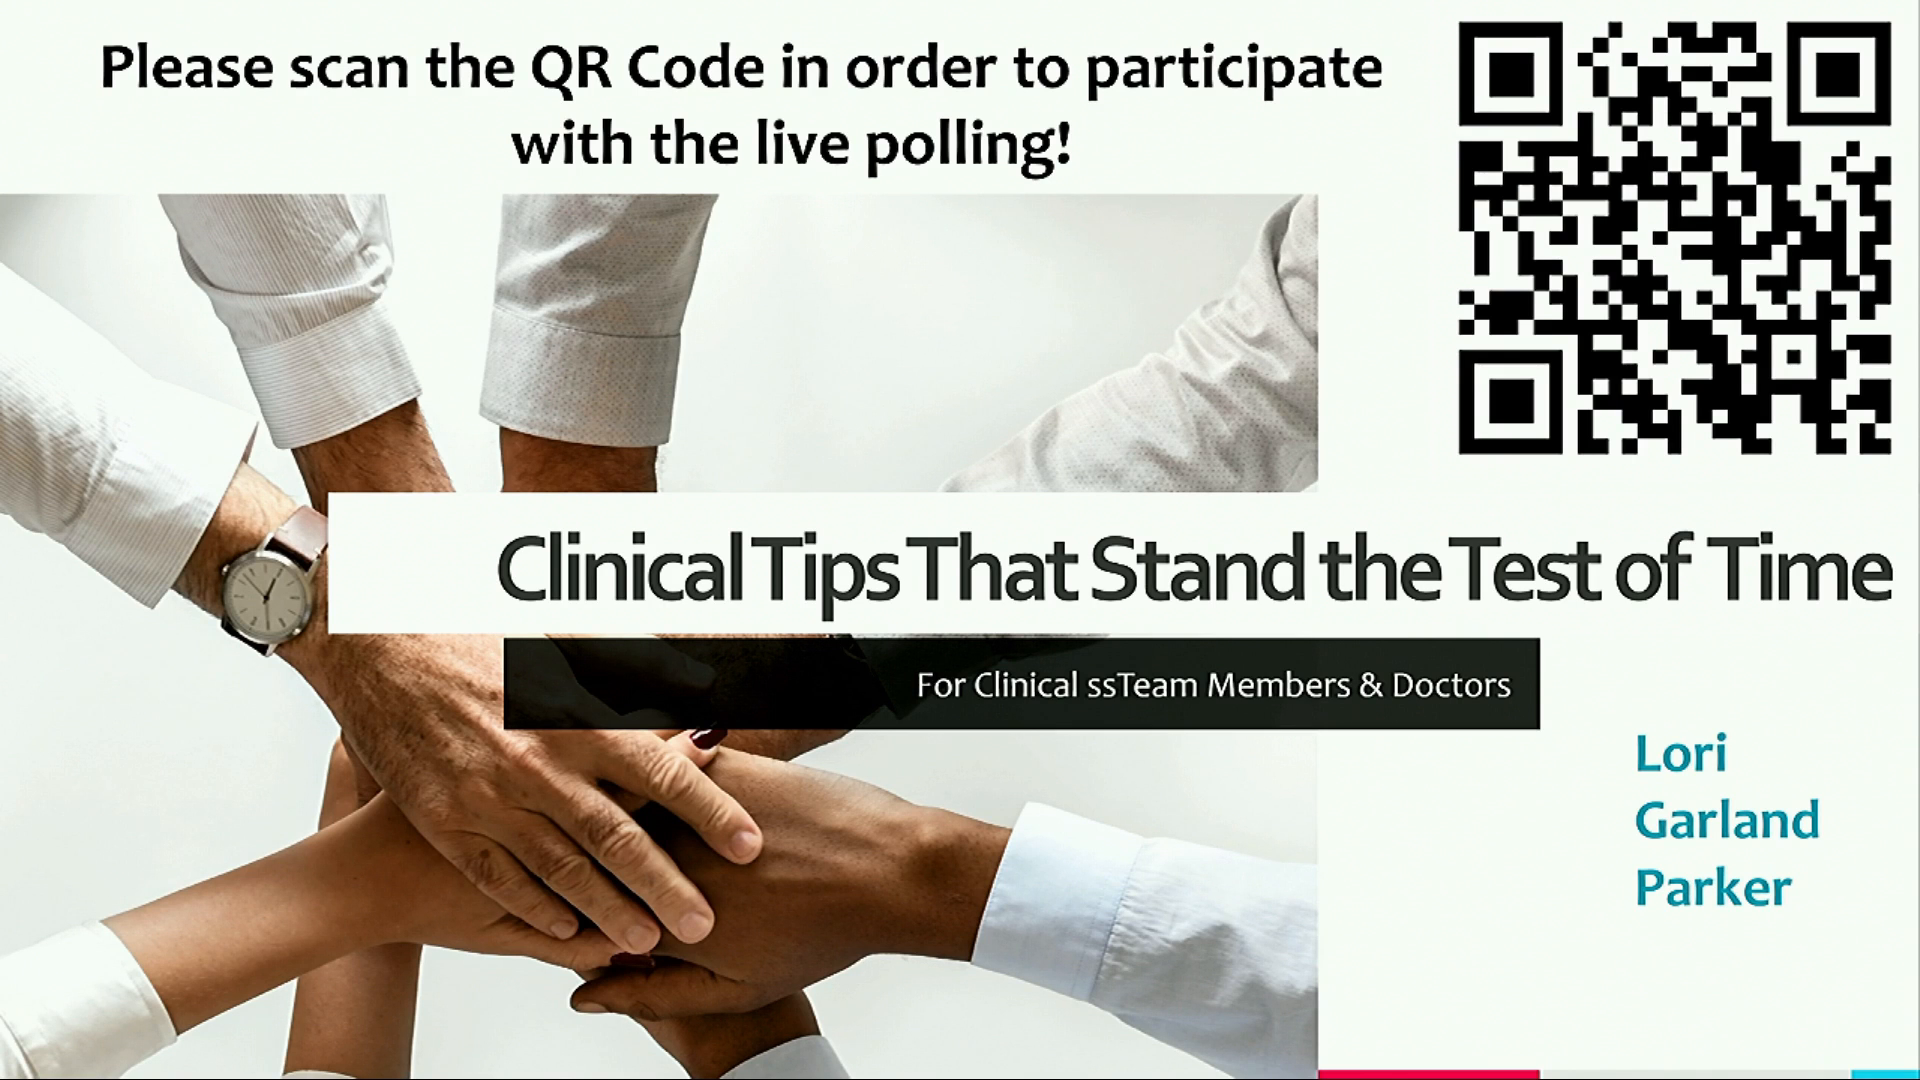 Clinical Tips That Stand the Test of Time